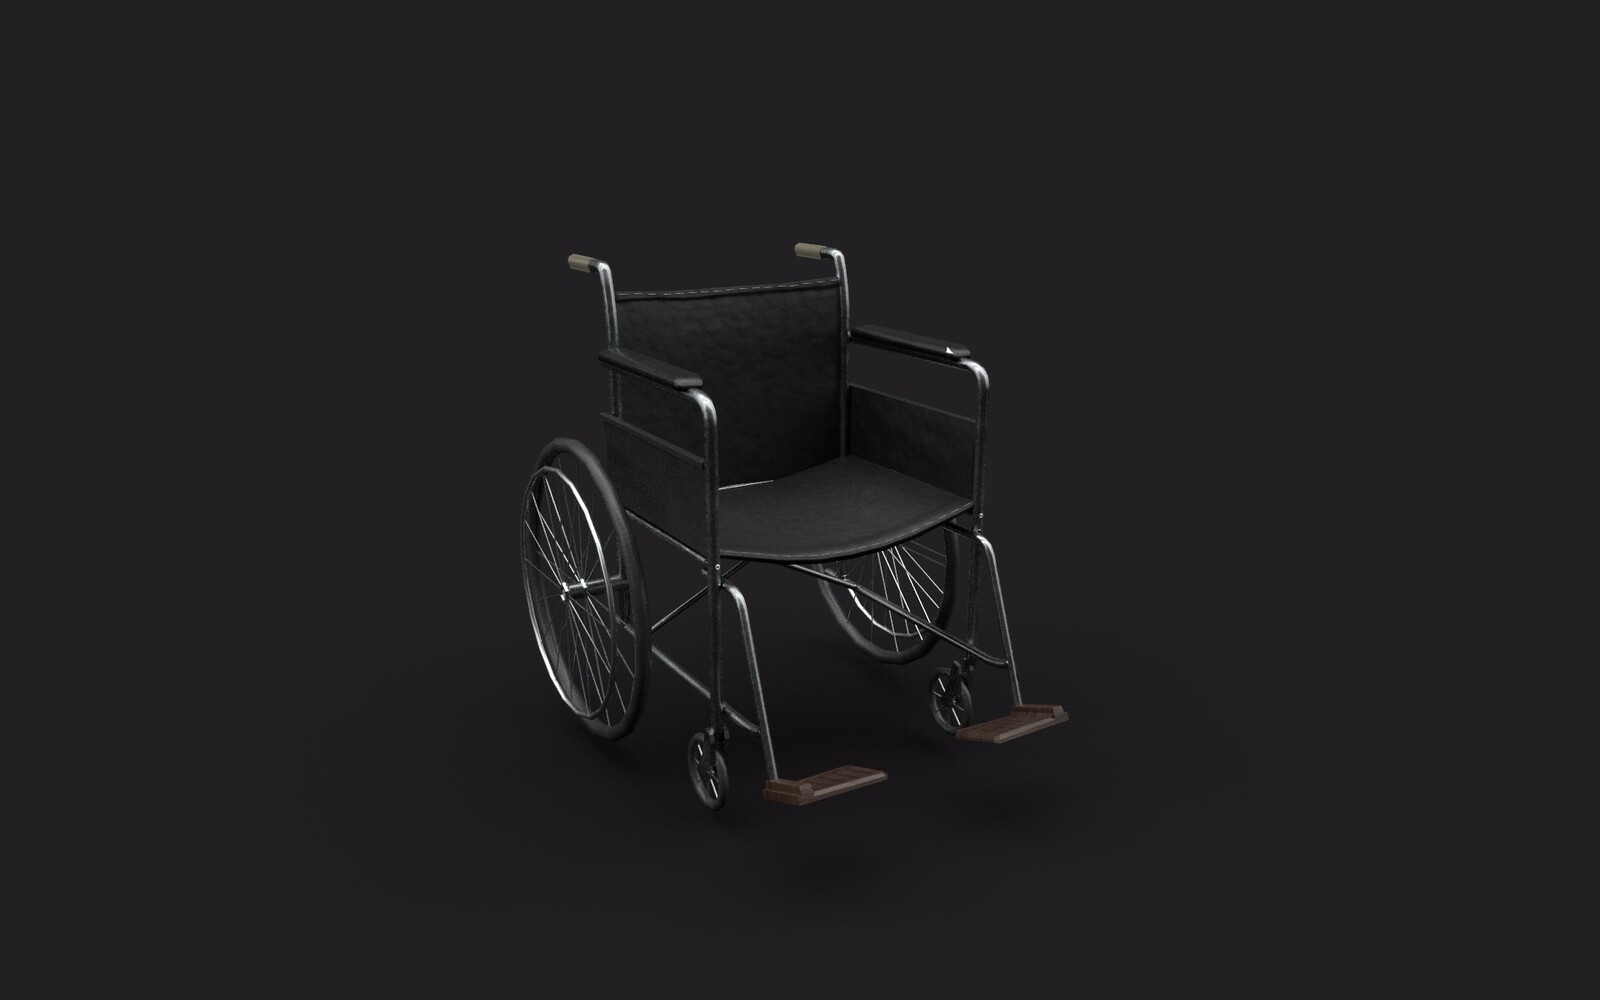 The wheelchair for 